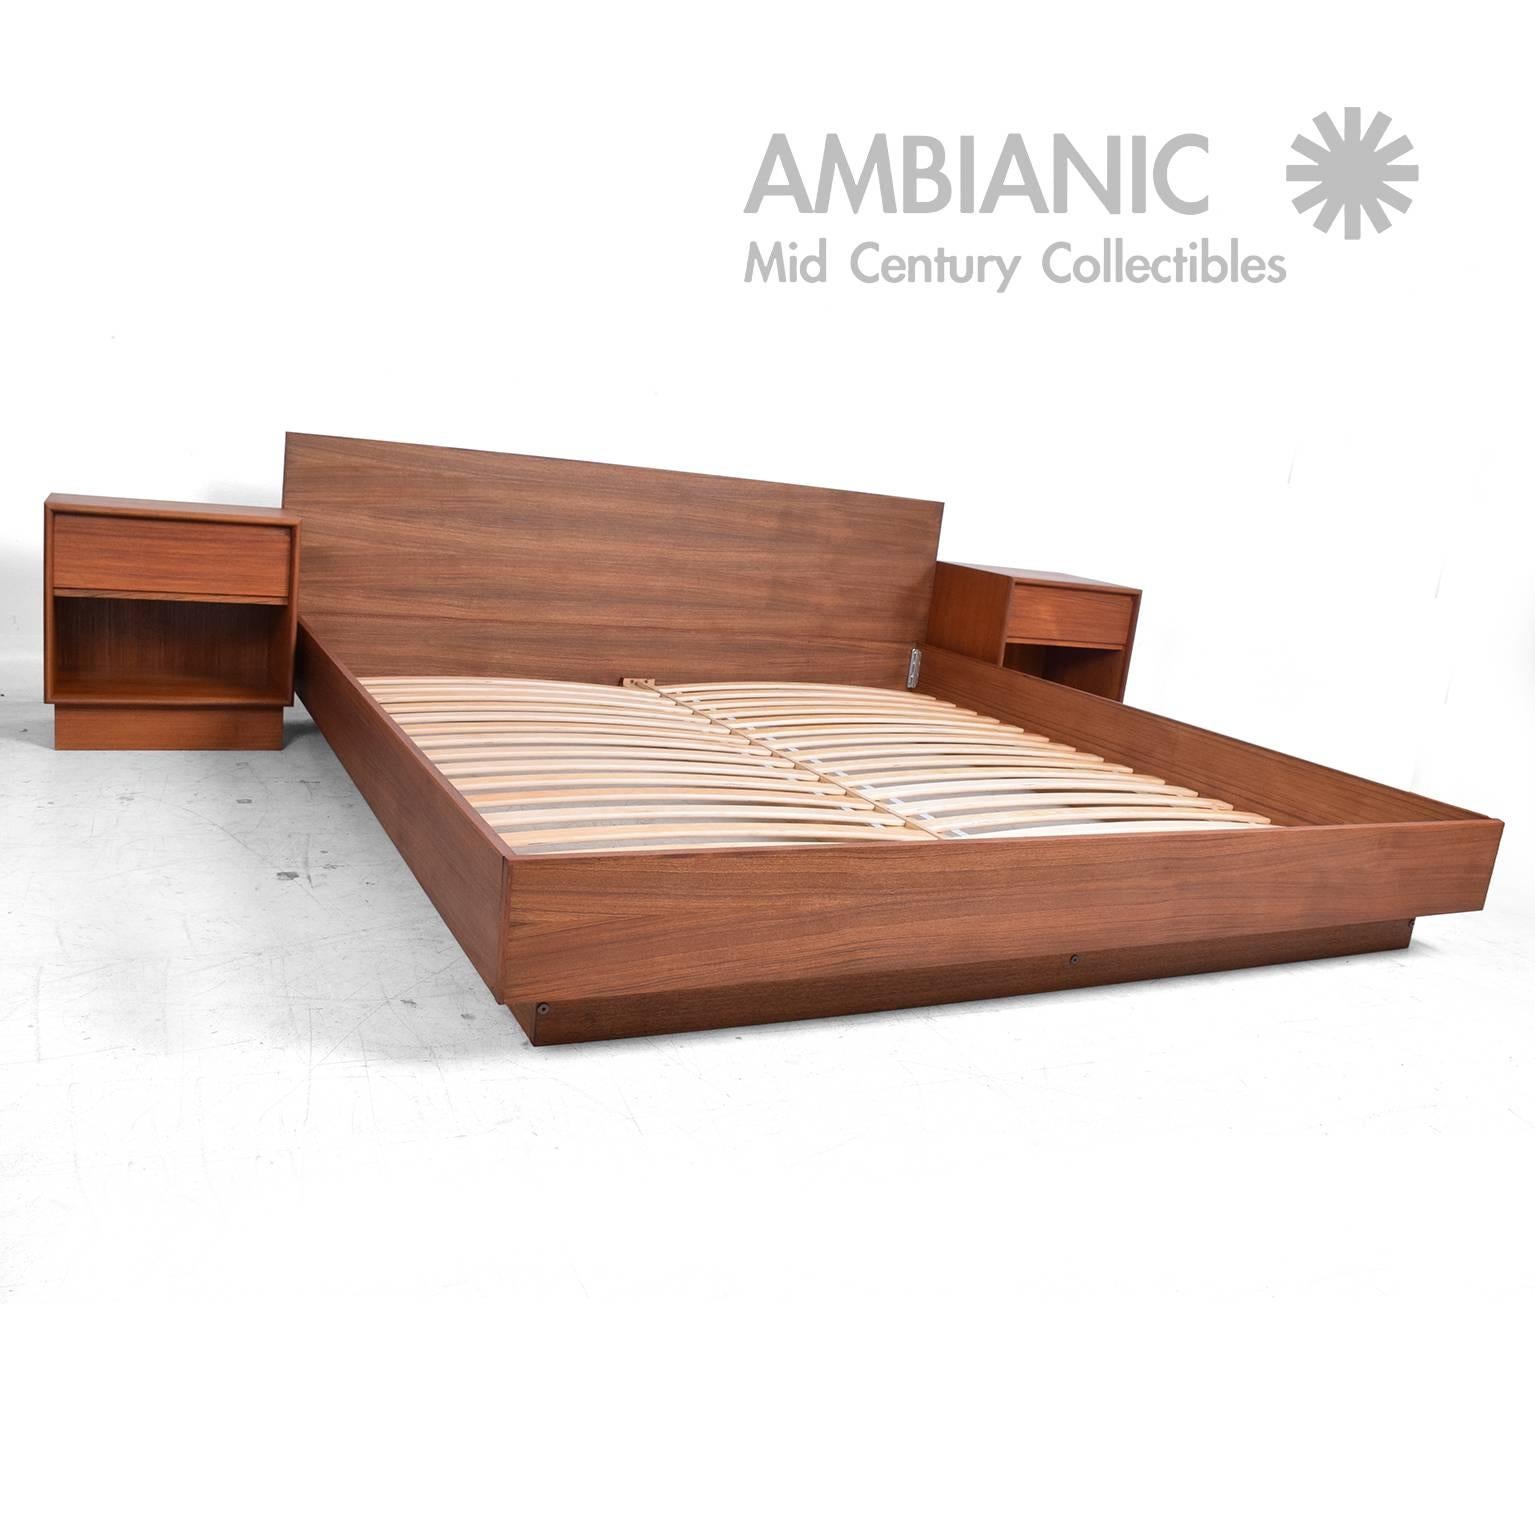 For your consideration a king-size platform bed in teakwood with nightstands.

The bed frame is a new production. 

Will fit a king-size mattress (Mattress area 77